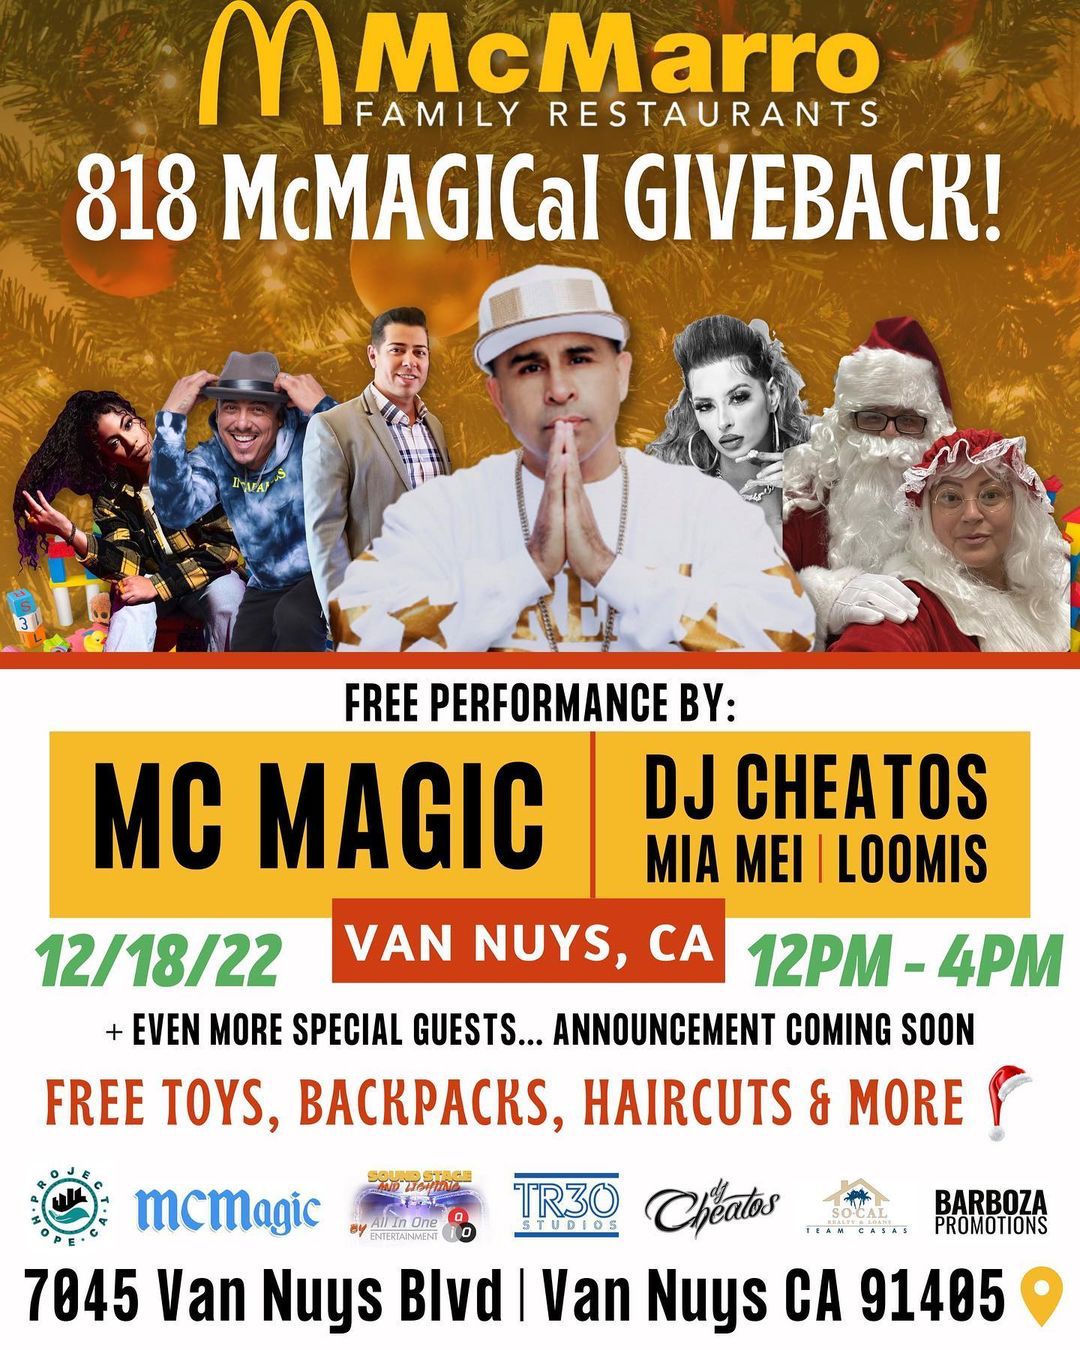 McMarro’s 818 McMagical Giveback Event Gains Appreciation from Los Angeles with Andrew Marroquin